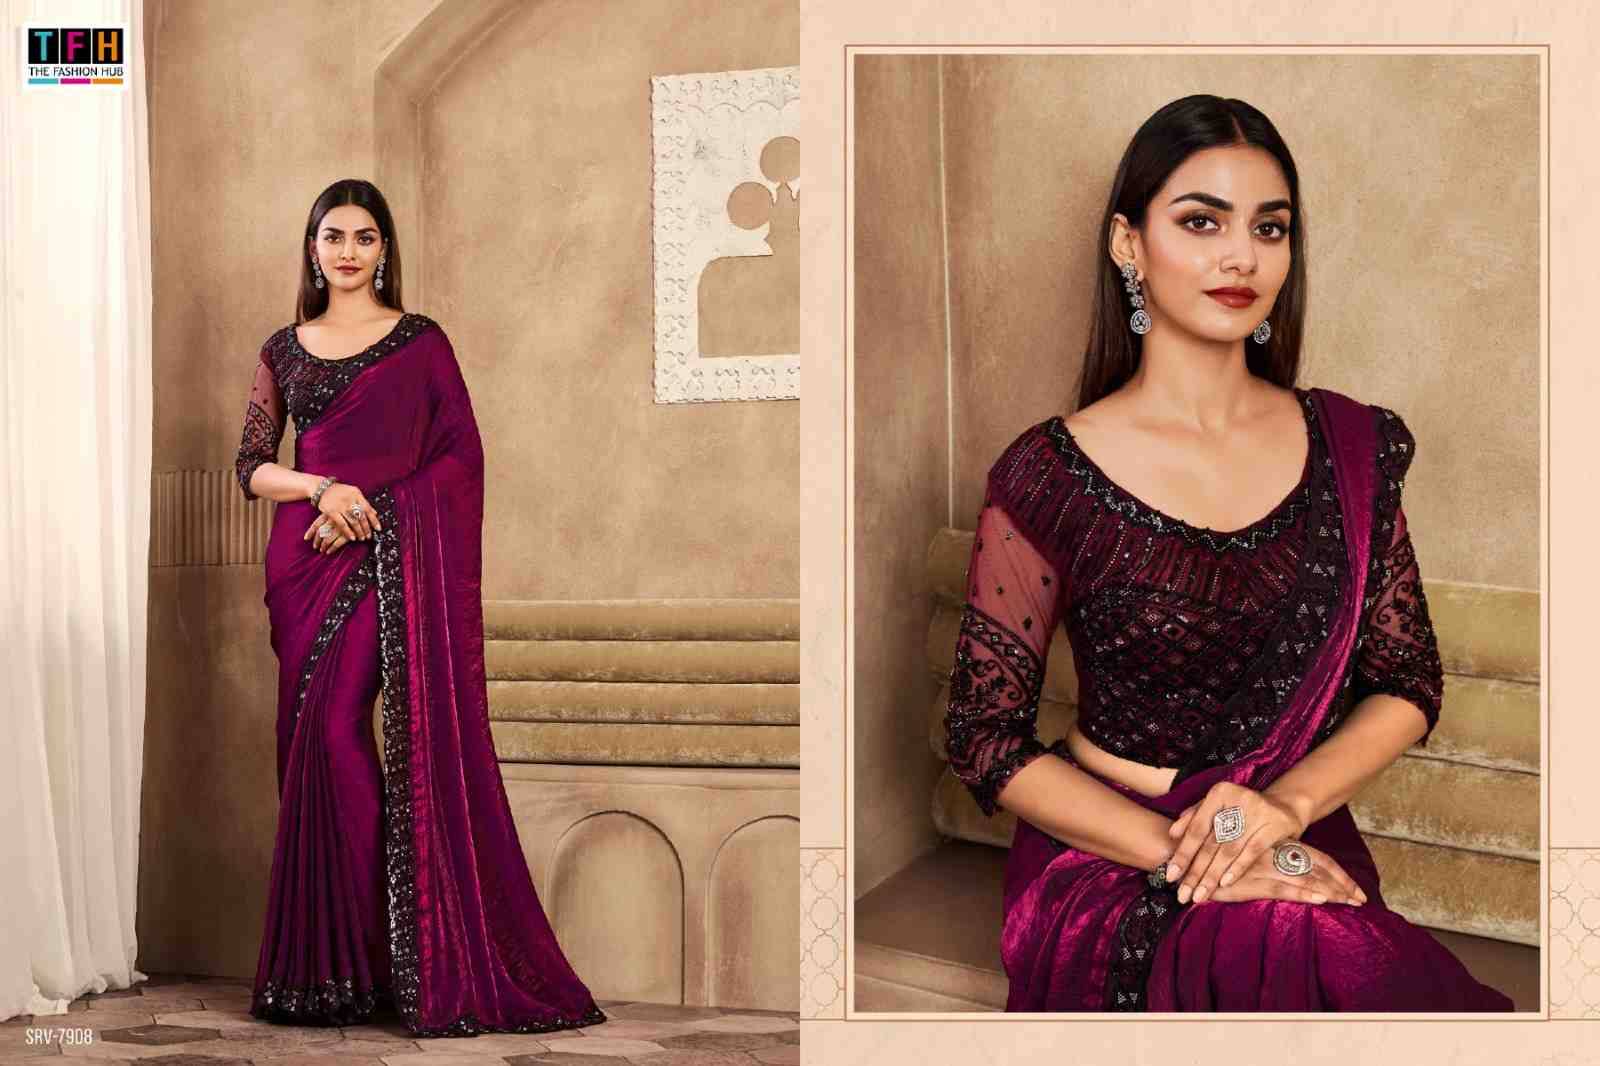 Sarvaratna By Tfh 7901 To 7912 Series Indian Traditional Wear Collection Beautiful Stylish Fancy Colorful Party Wear & Occasional Wear Silk Sarees At Wholesale Price